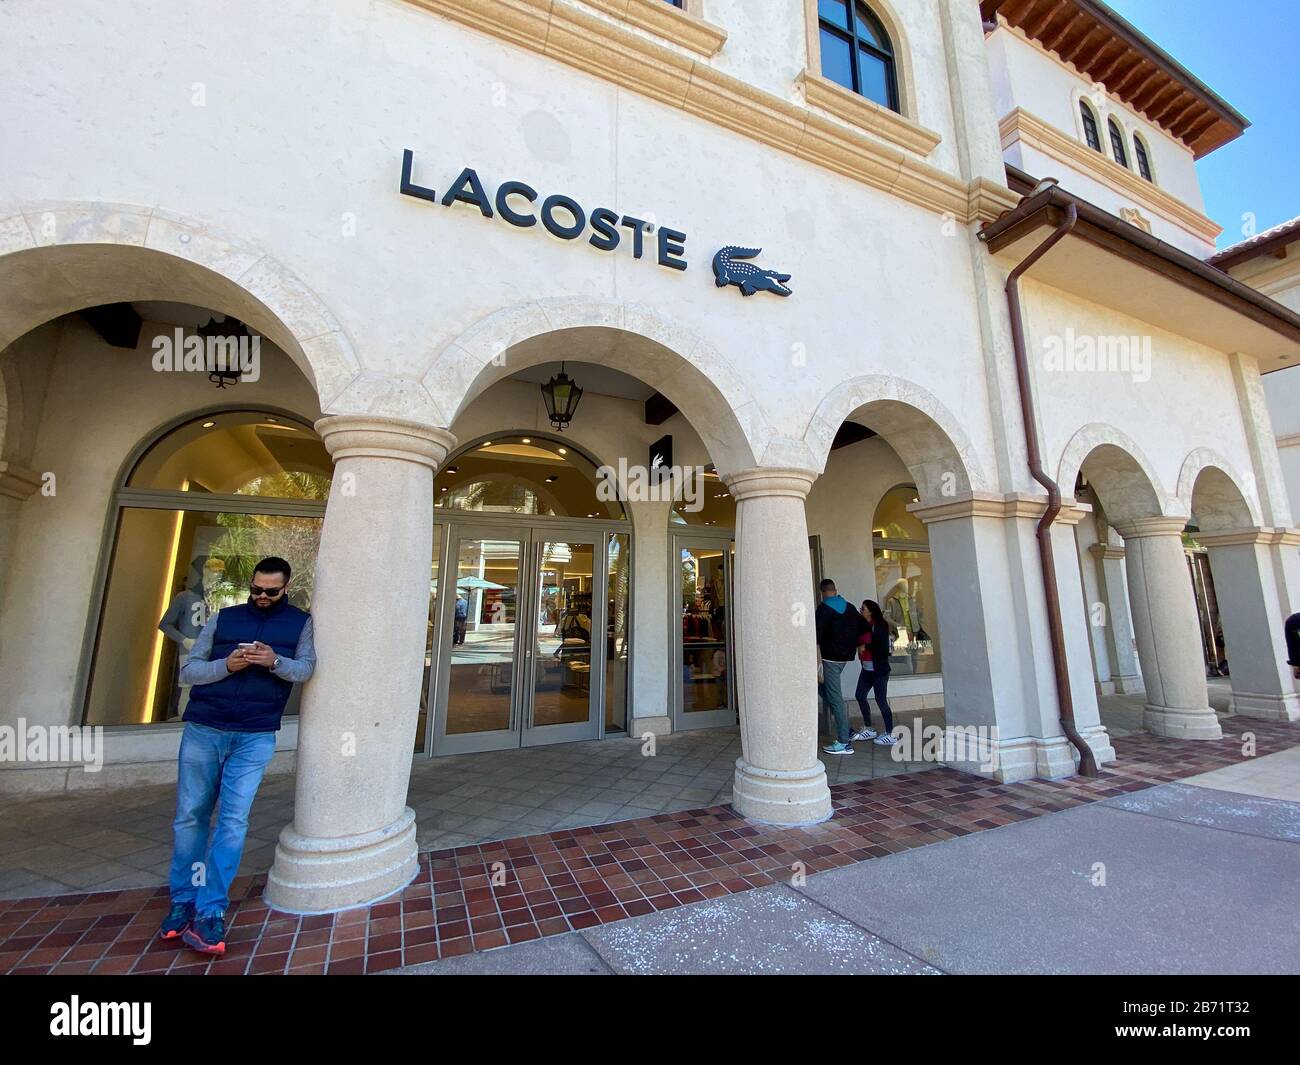 Orlando, FL/USA-2/29/20: A Lacoste clothing retail store at an outdoor mall - Alamy